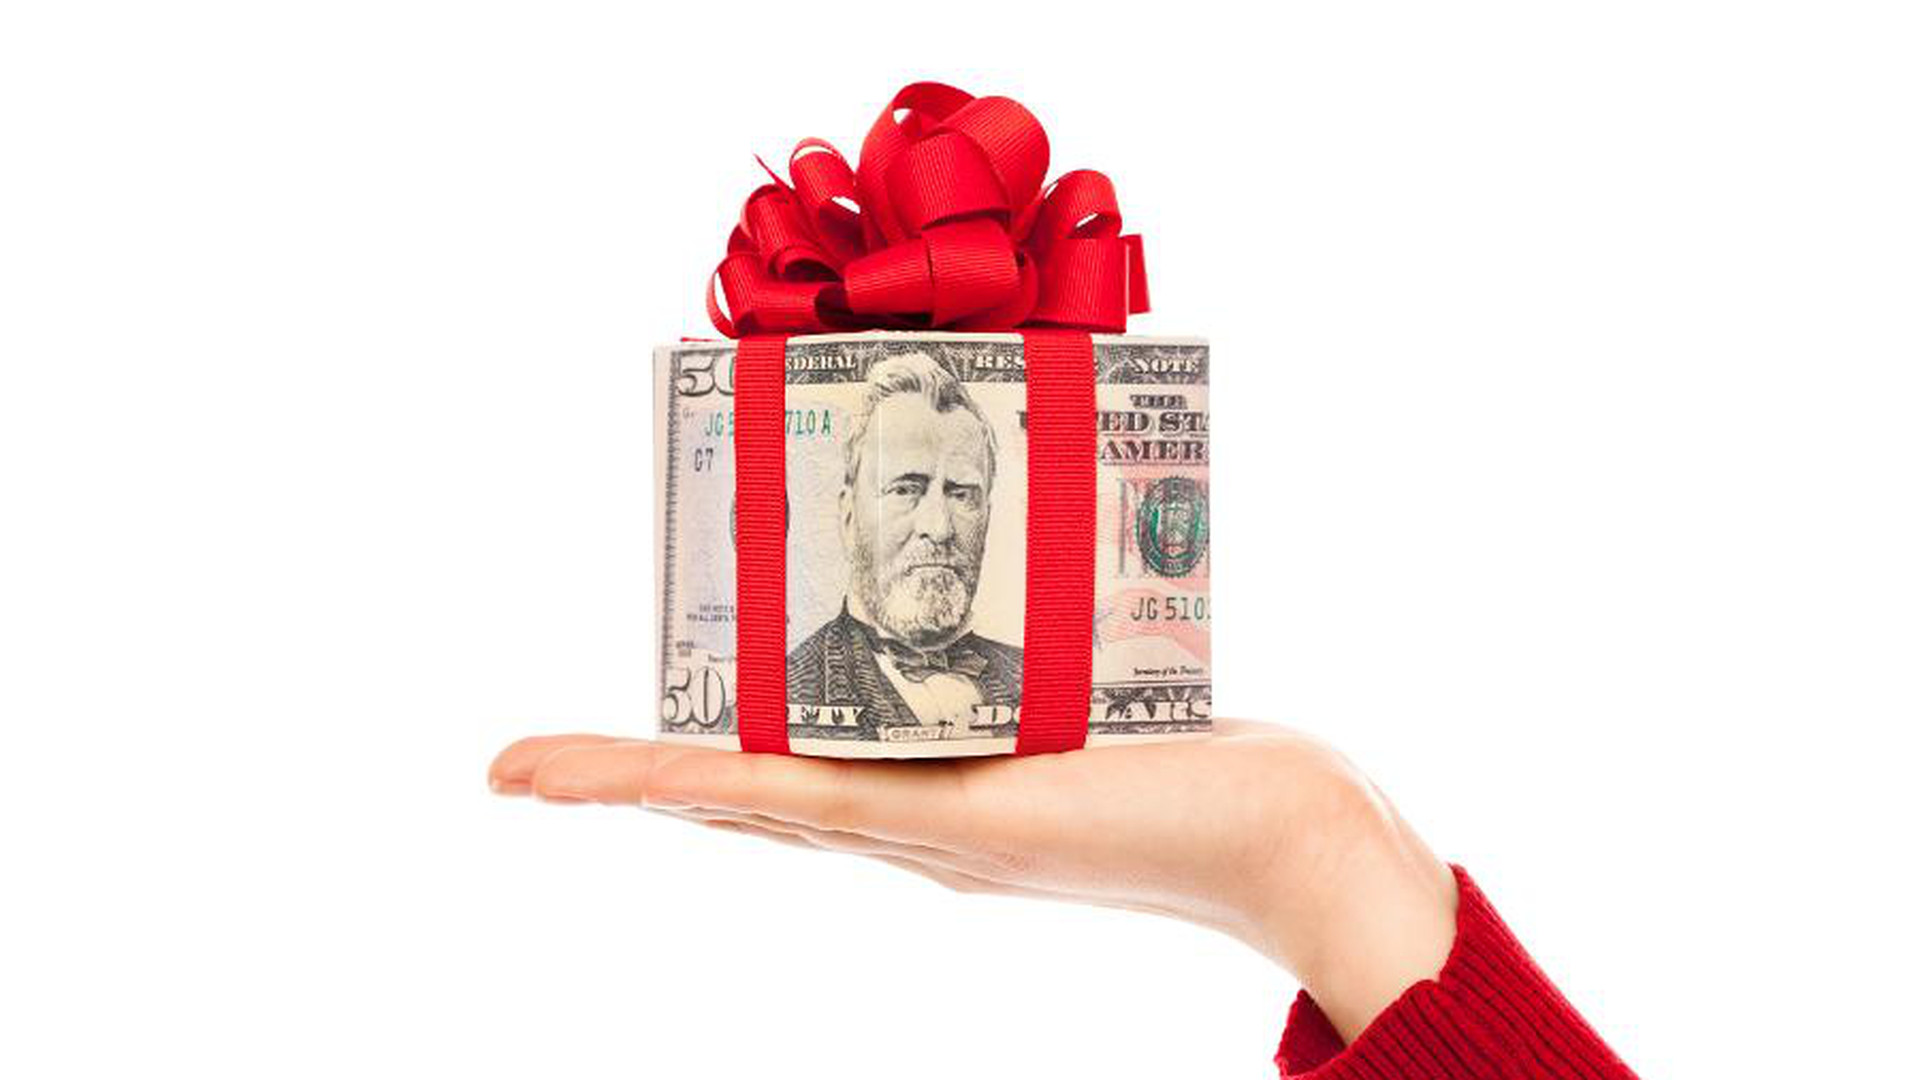 Feeling Generous? Don’t Let Your Holiday Or Year-End Bonuses Land You In Hot Water